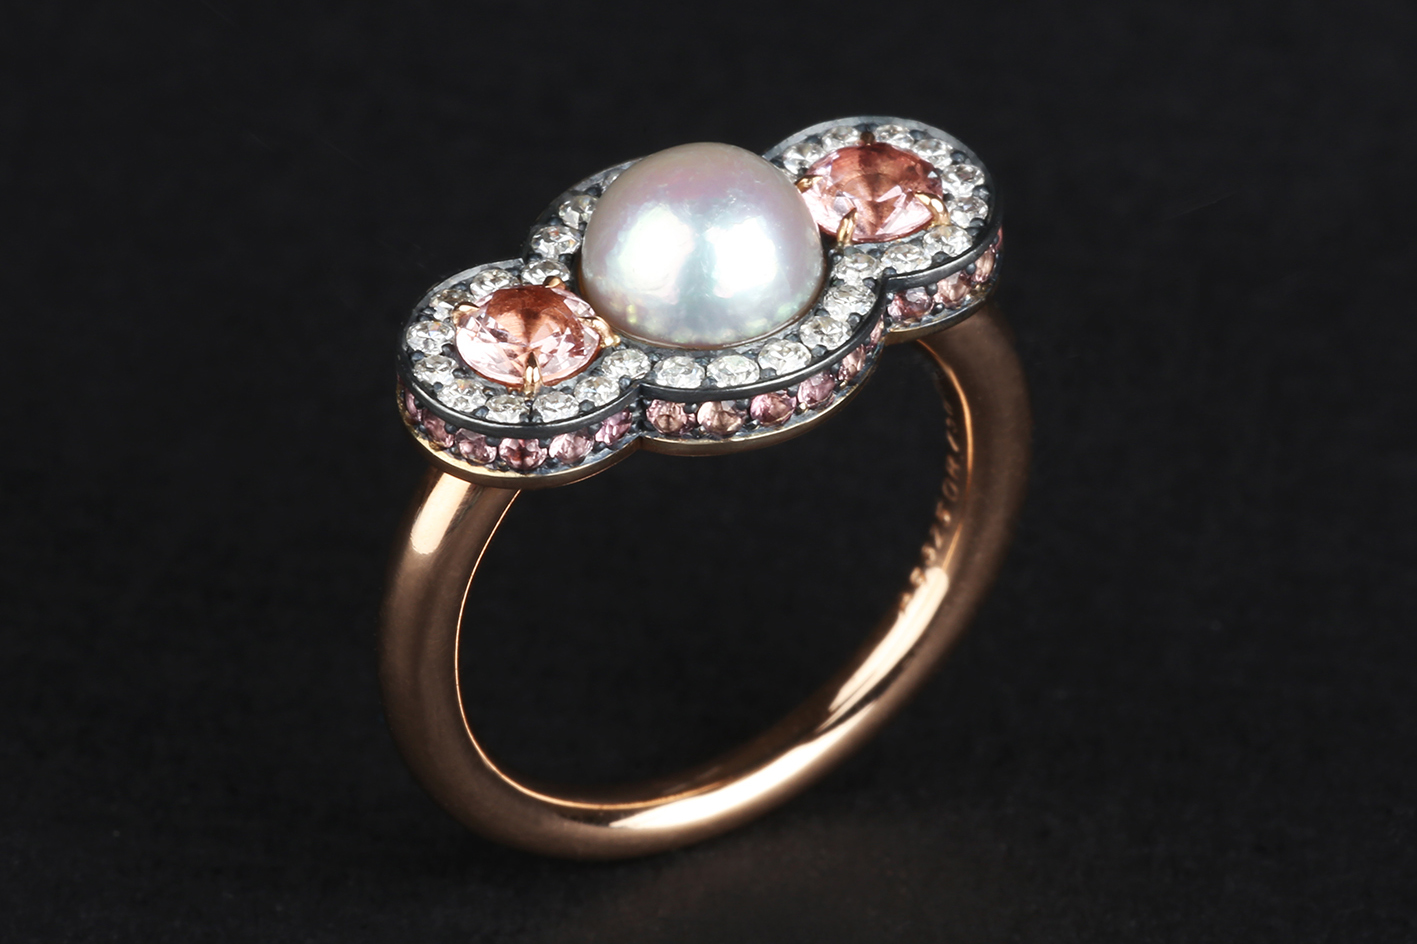 Nadia Morganthaler natural white pearl, spinel, pink sapphire and diamond ring